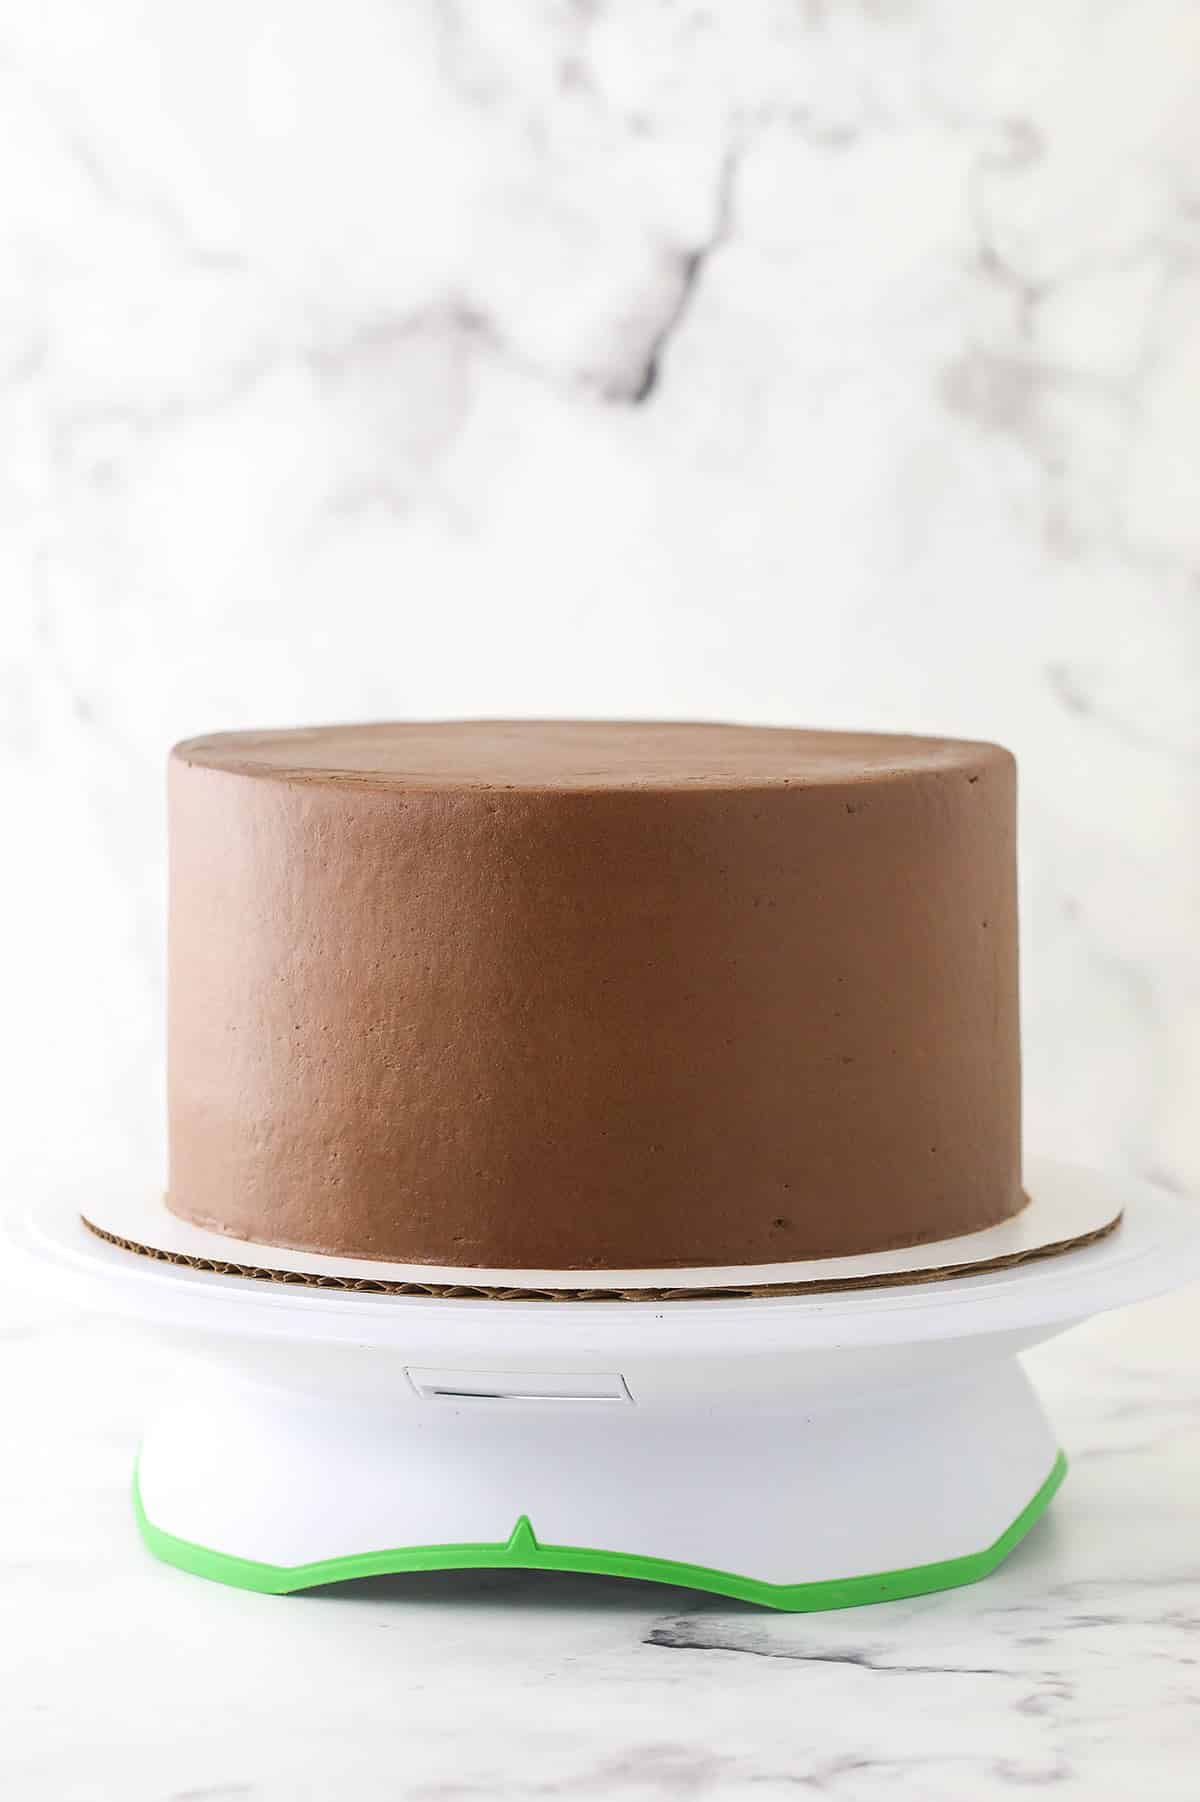 A frosted chocolate cake on a cake stand